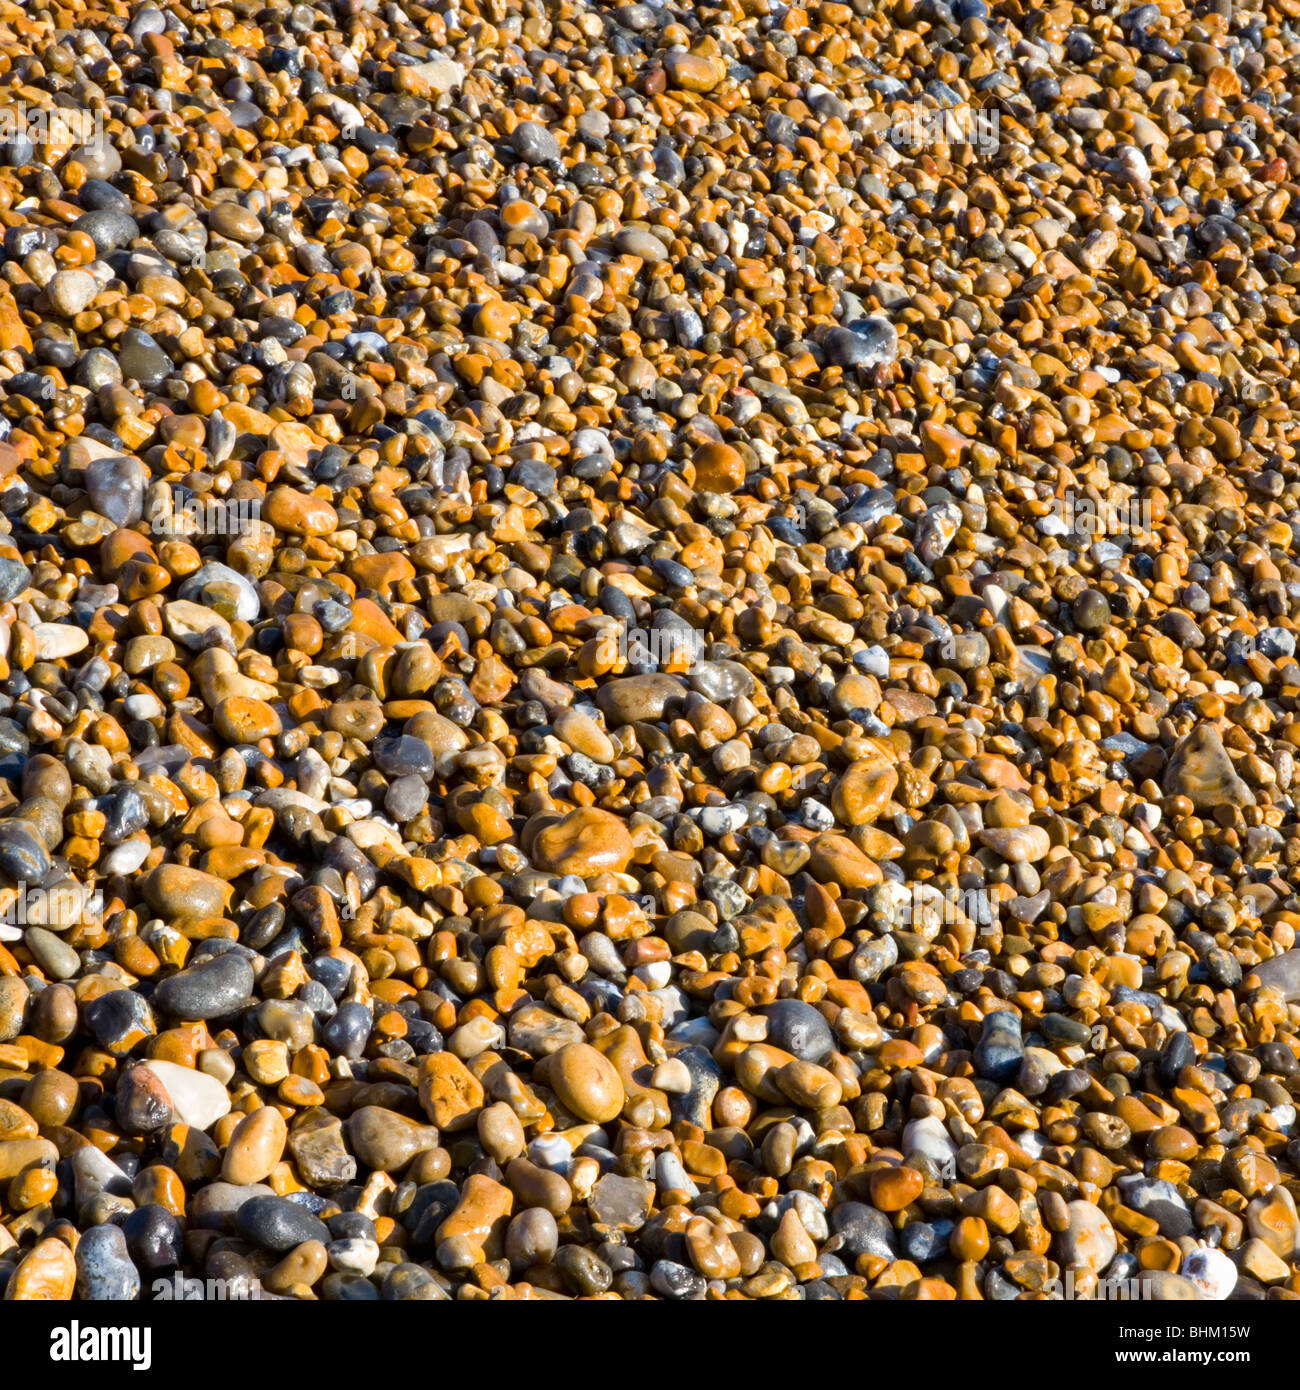 Hastings, East Sussex, England. Beach pebbles glistening in the sun. Stock Photo